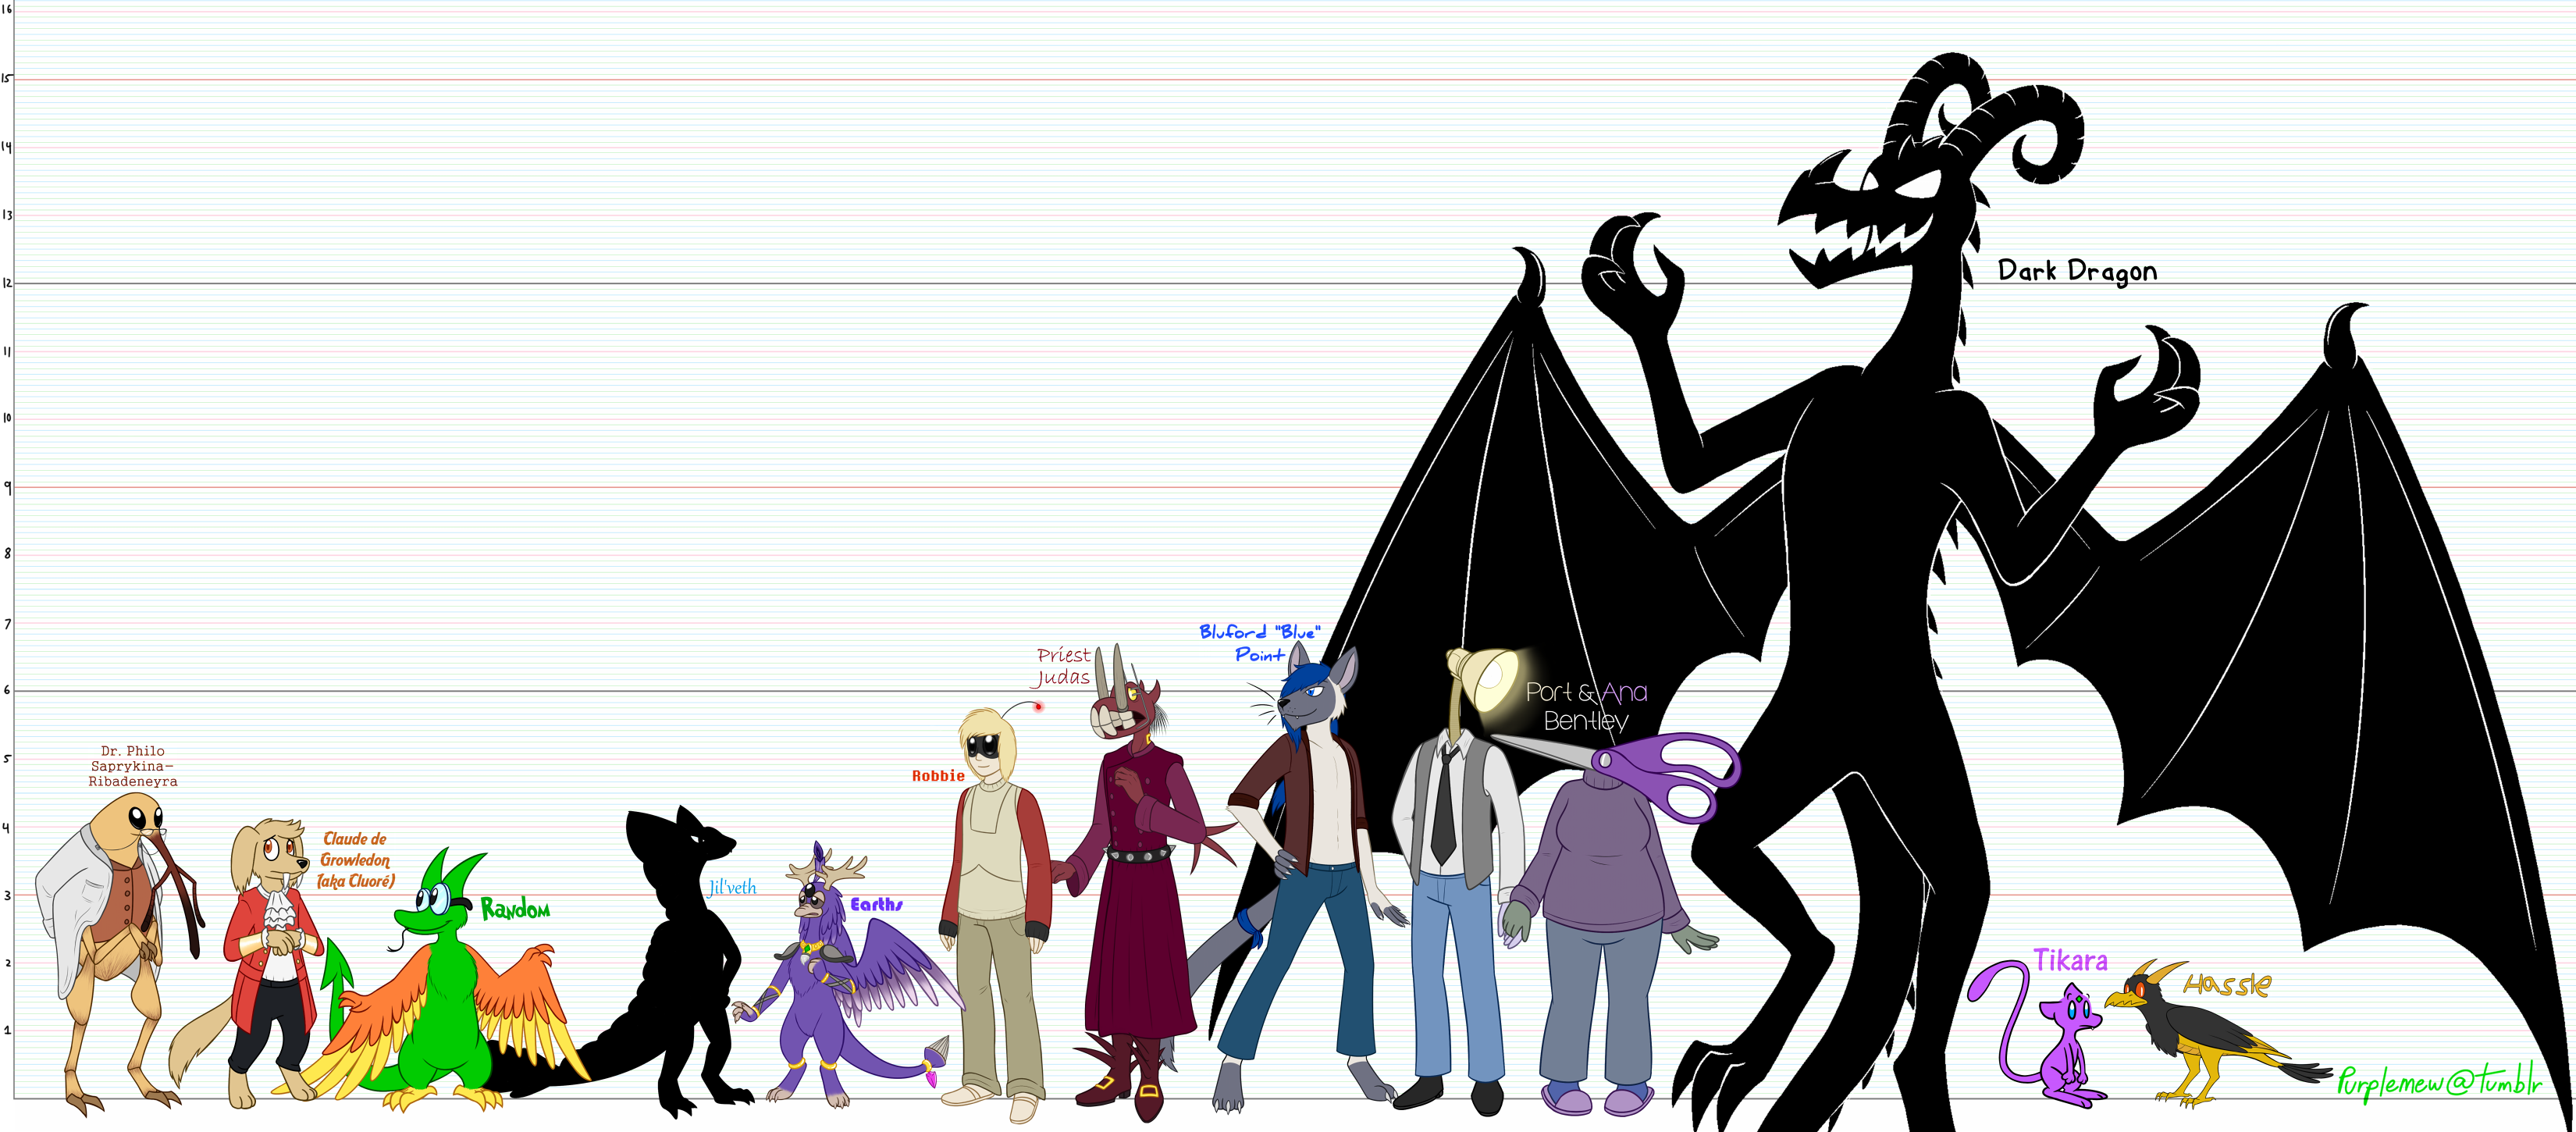 Character Height Chart